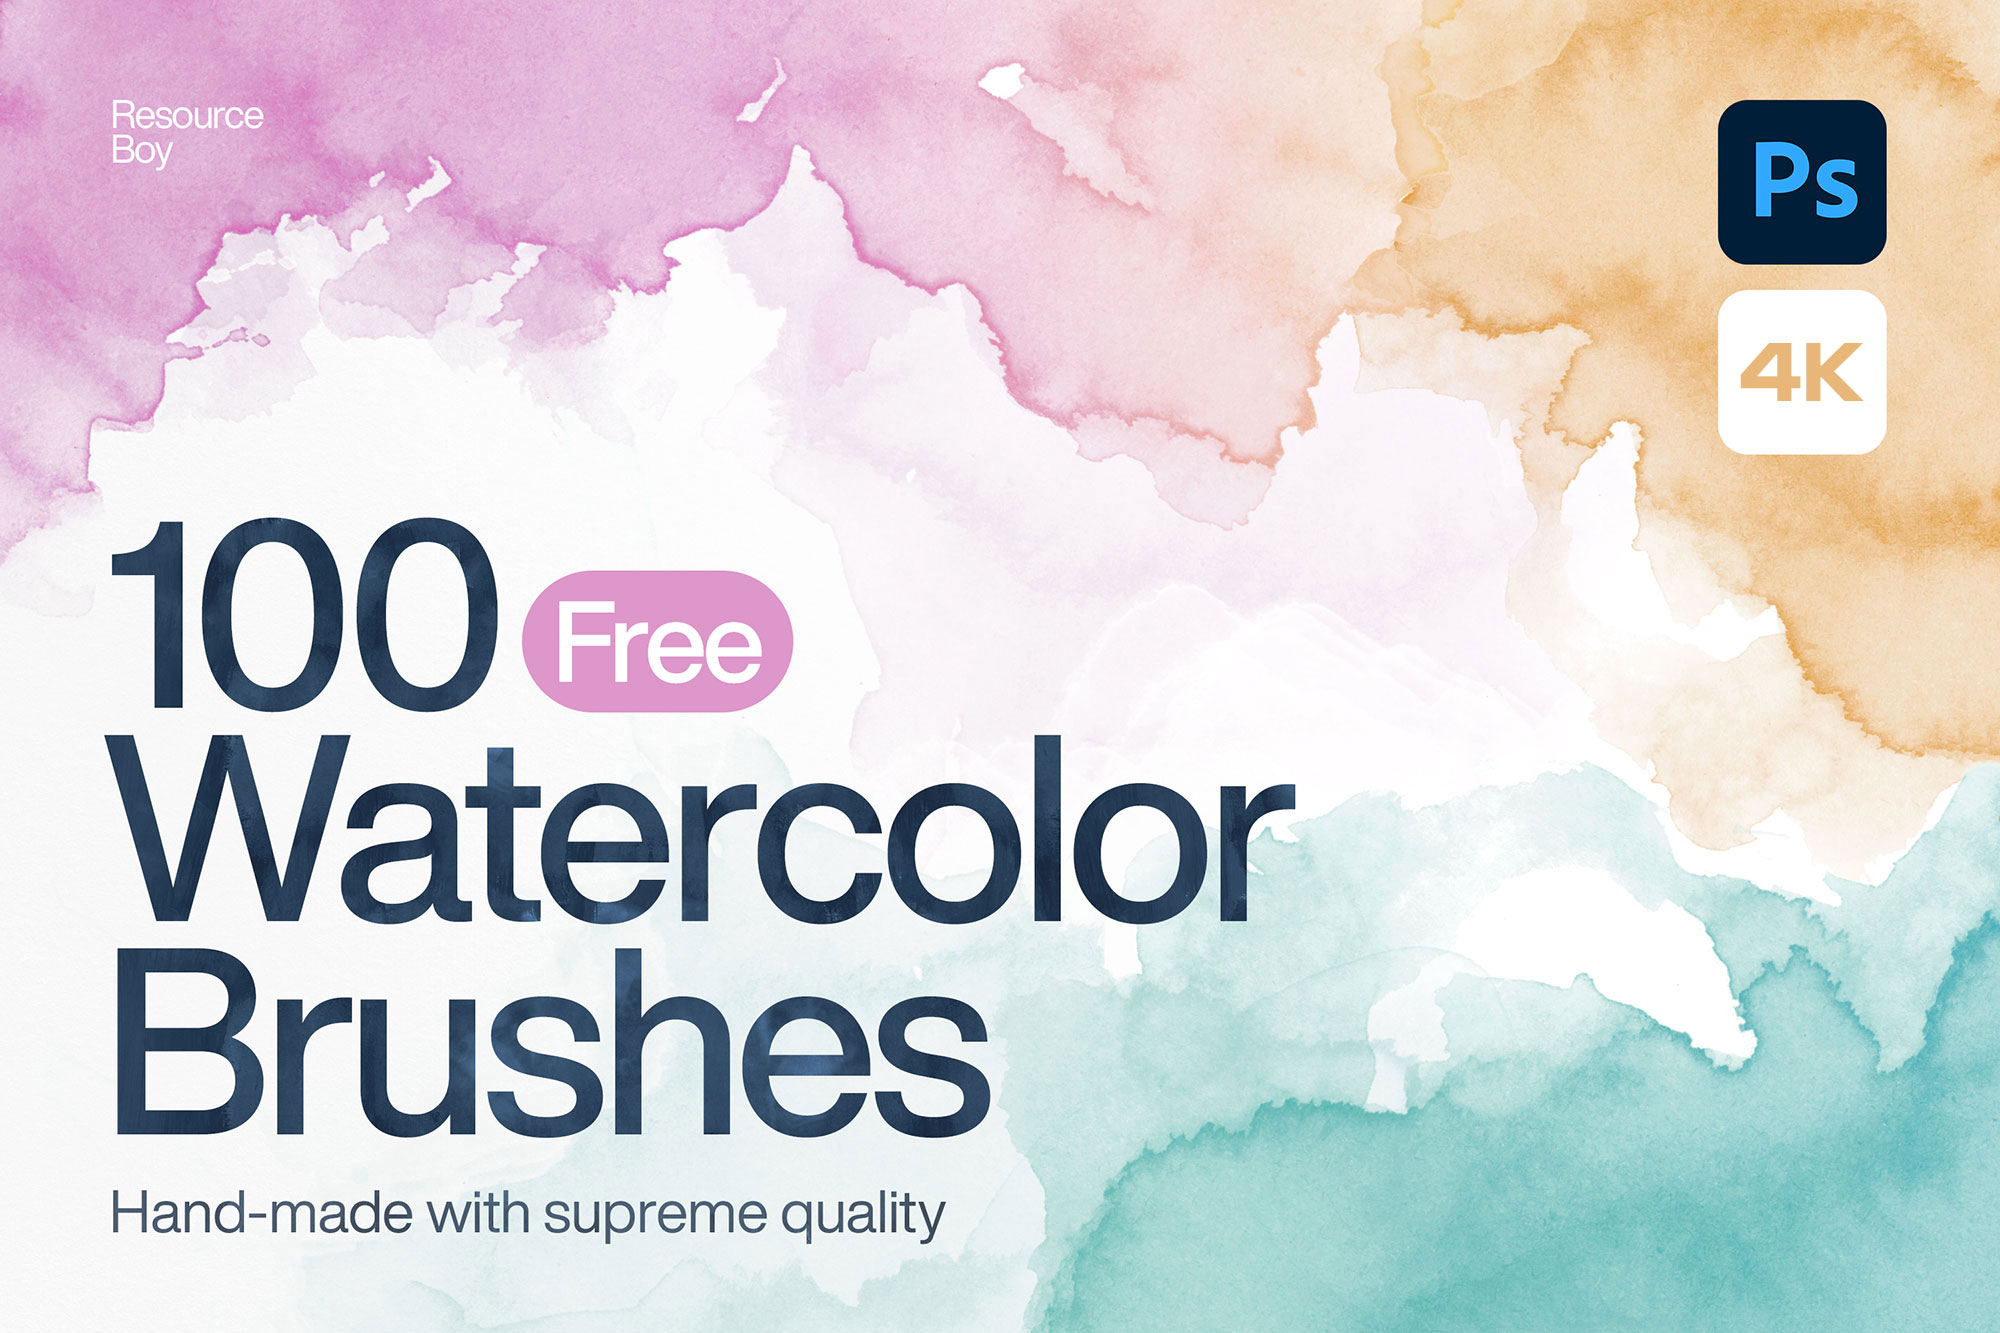 photoshop watercolor filter free download